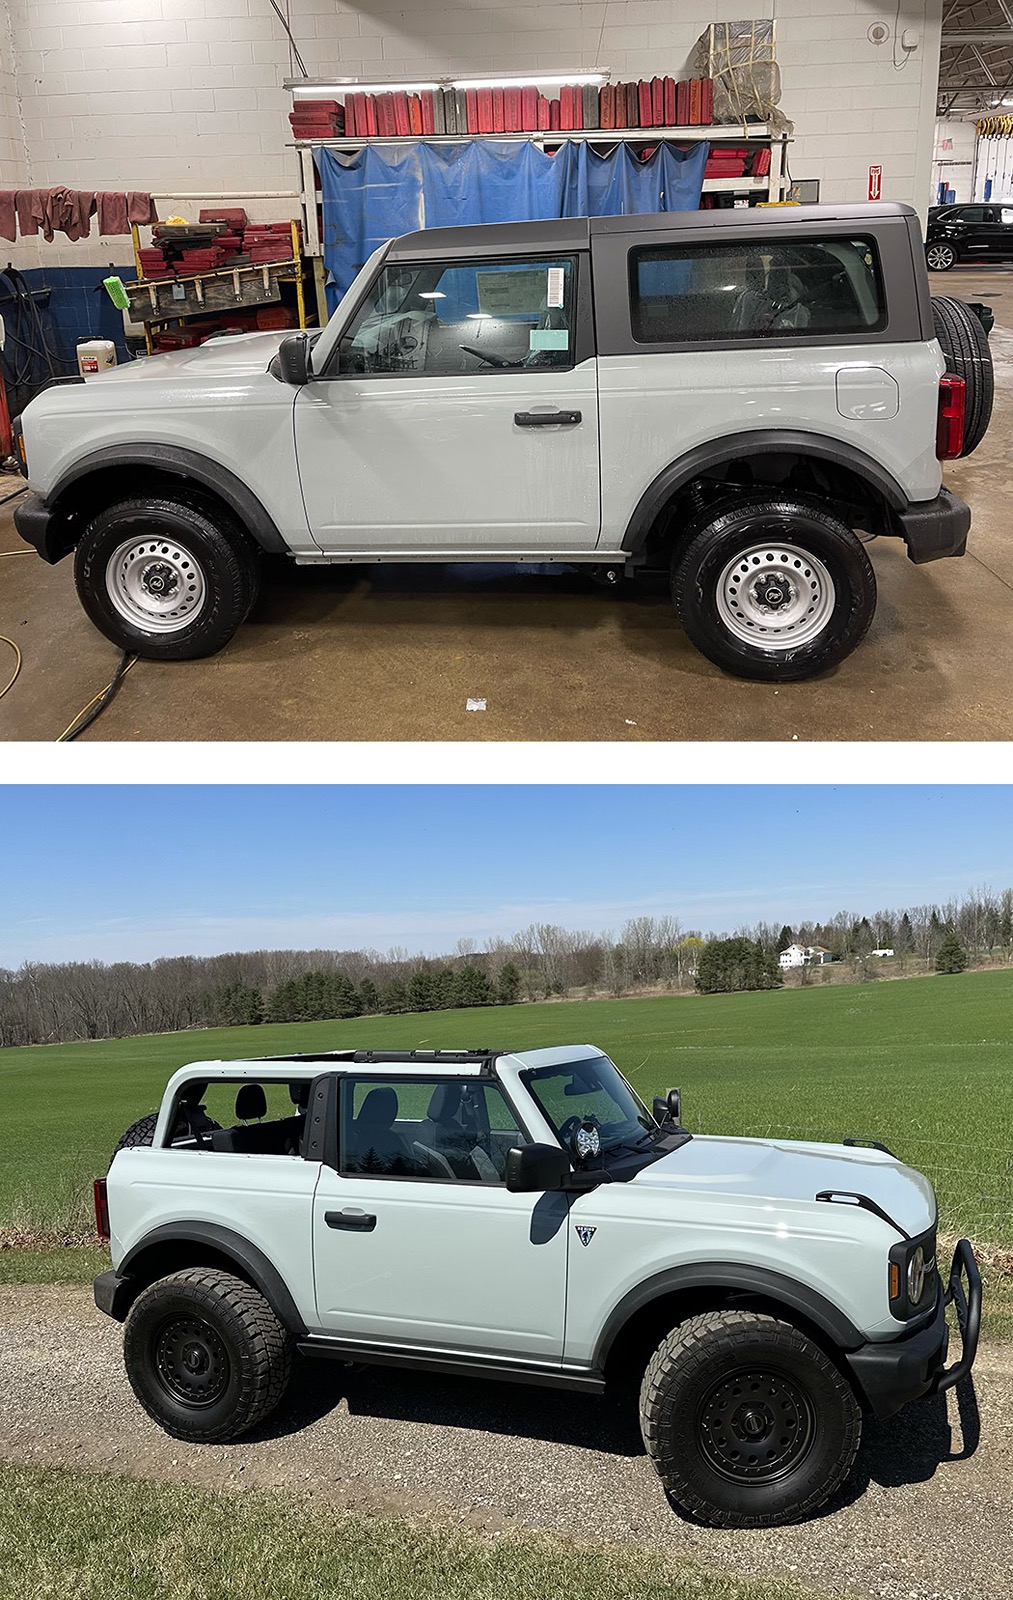 Ford Bronco 2x1 Tuesday! Let's see those before & after photos. Bronco-Baby-Grownu